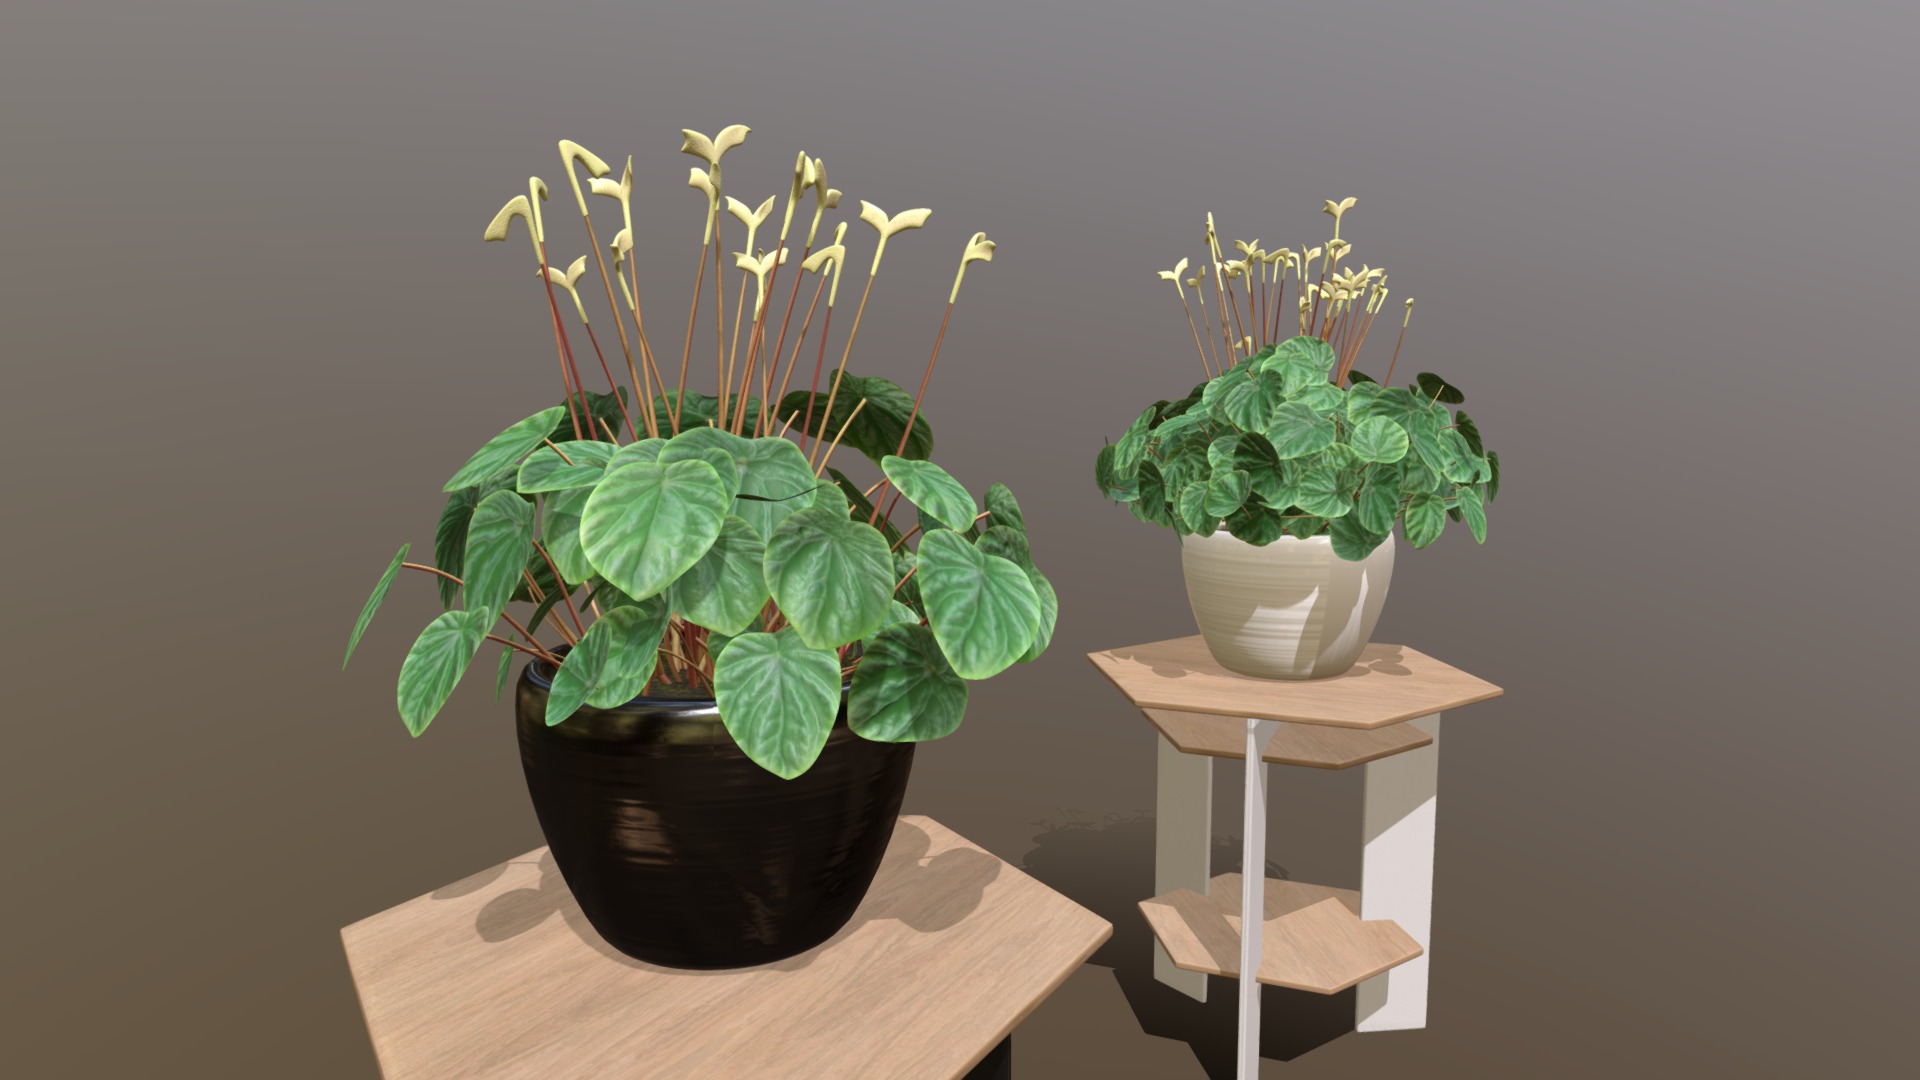 3D model Indoor plant / Peperomia caperata “Lilian” - This is a 3D model of the Indoor plant / Peperomia caperata “Lilian”. The 3D model is about two potted plants on a table.